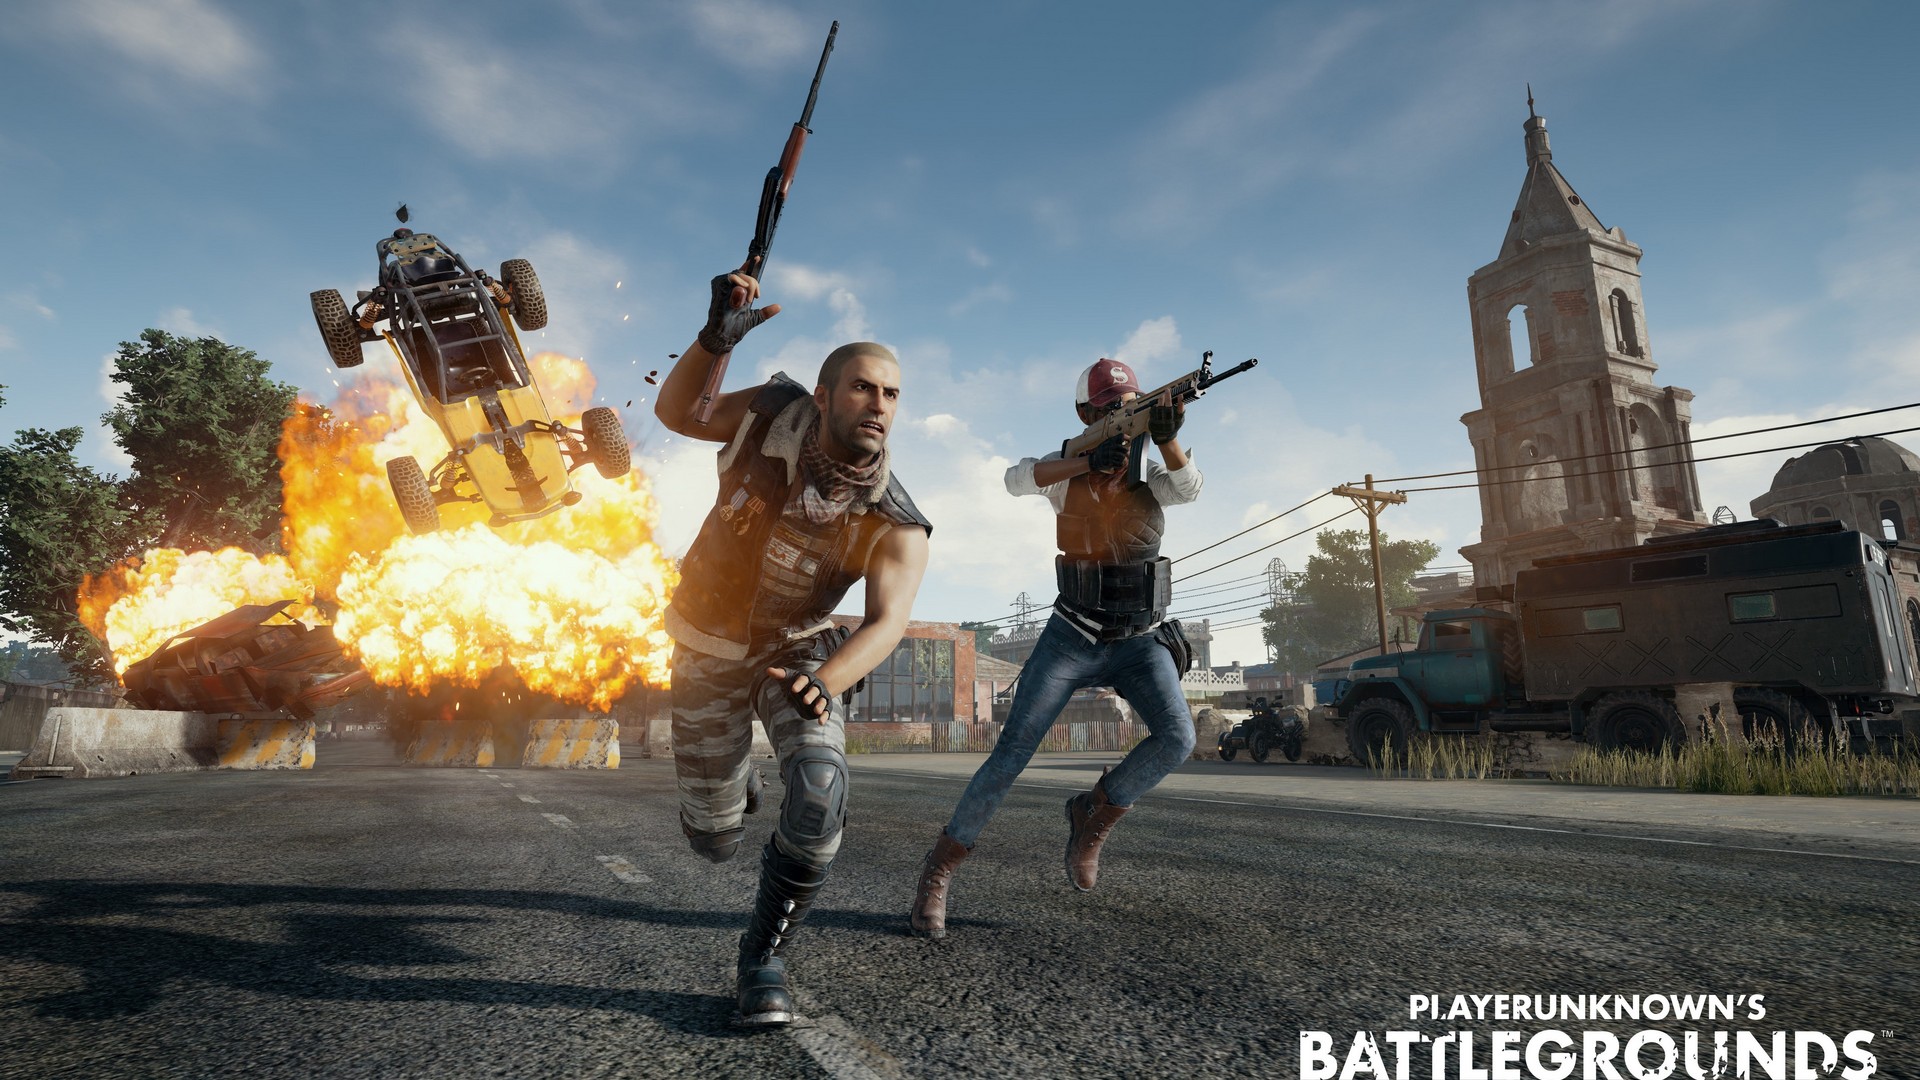 Wallpaper PUBG Xbox One Desktop with image resolution 1920x1080 pixel. You can use this wallpaper as background for your desktop Computer Screensavers, Android or iPhone smartphones